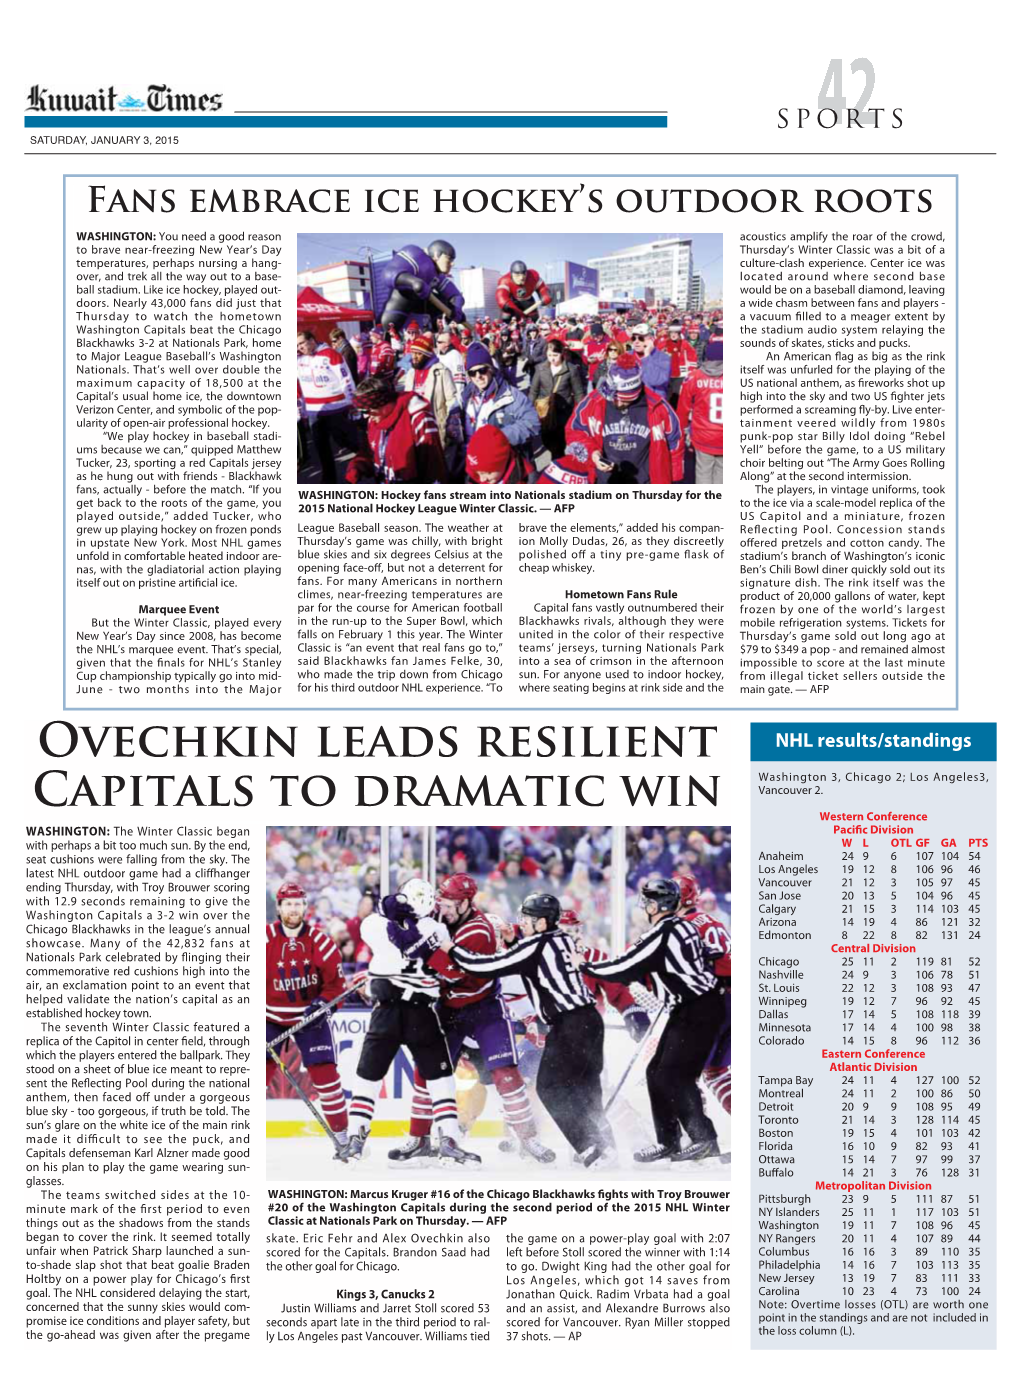 Ovechkin Leads Resilient Capitals to Dramatic